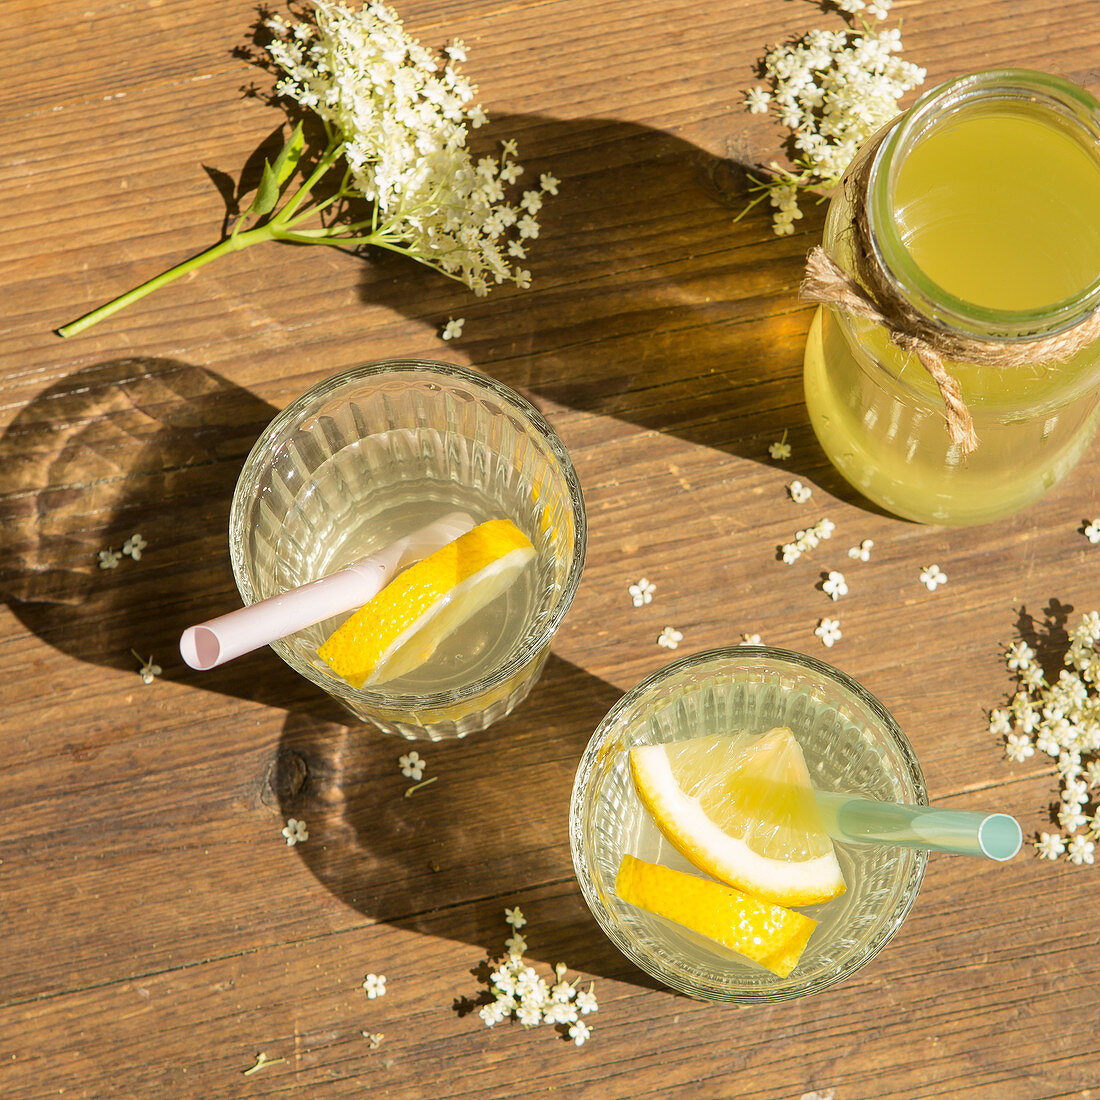 Two glasses od mixed elderflower cordial and a jar of fresh cordial on a wooden table with freshly picked Elderflowers